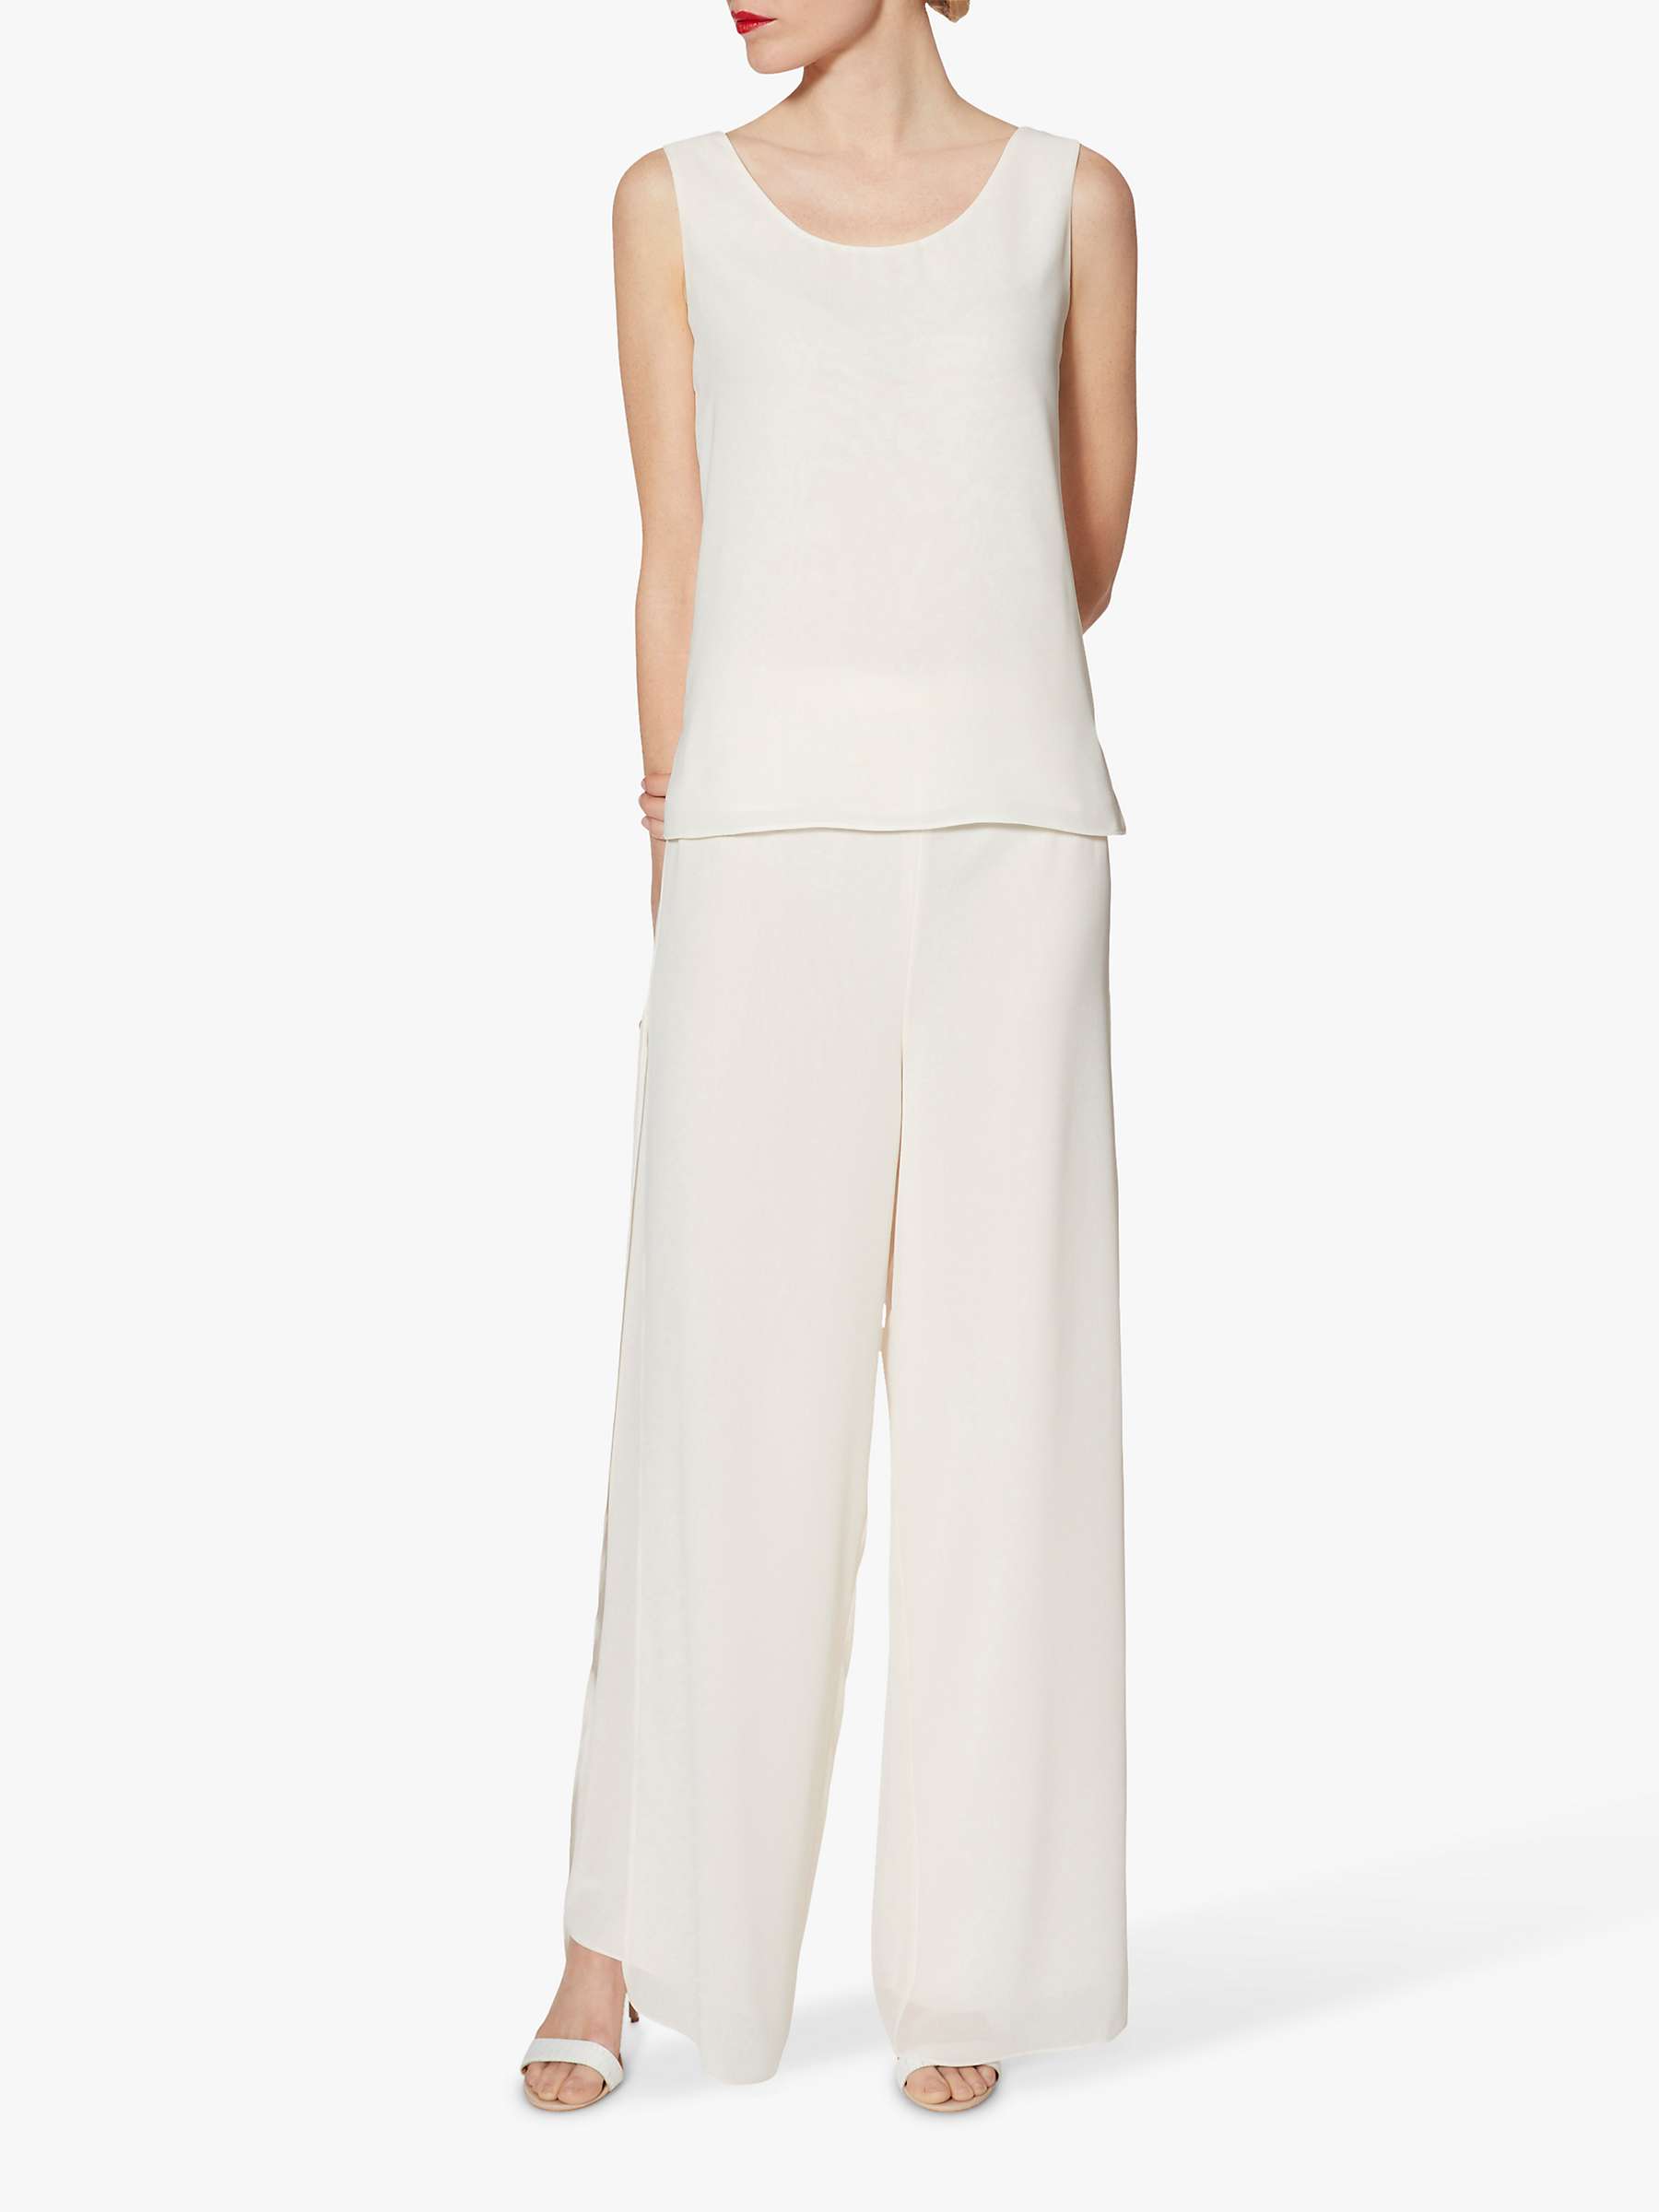 Buy Gina Bacconi Double Layer Chiffon Camisole, Chalk Online at johnlewis.com